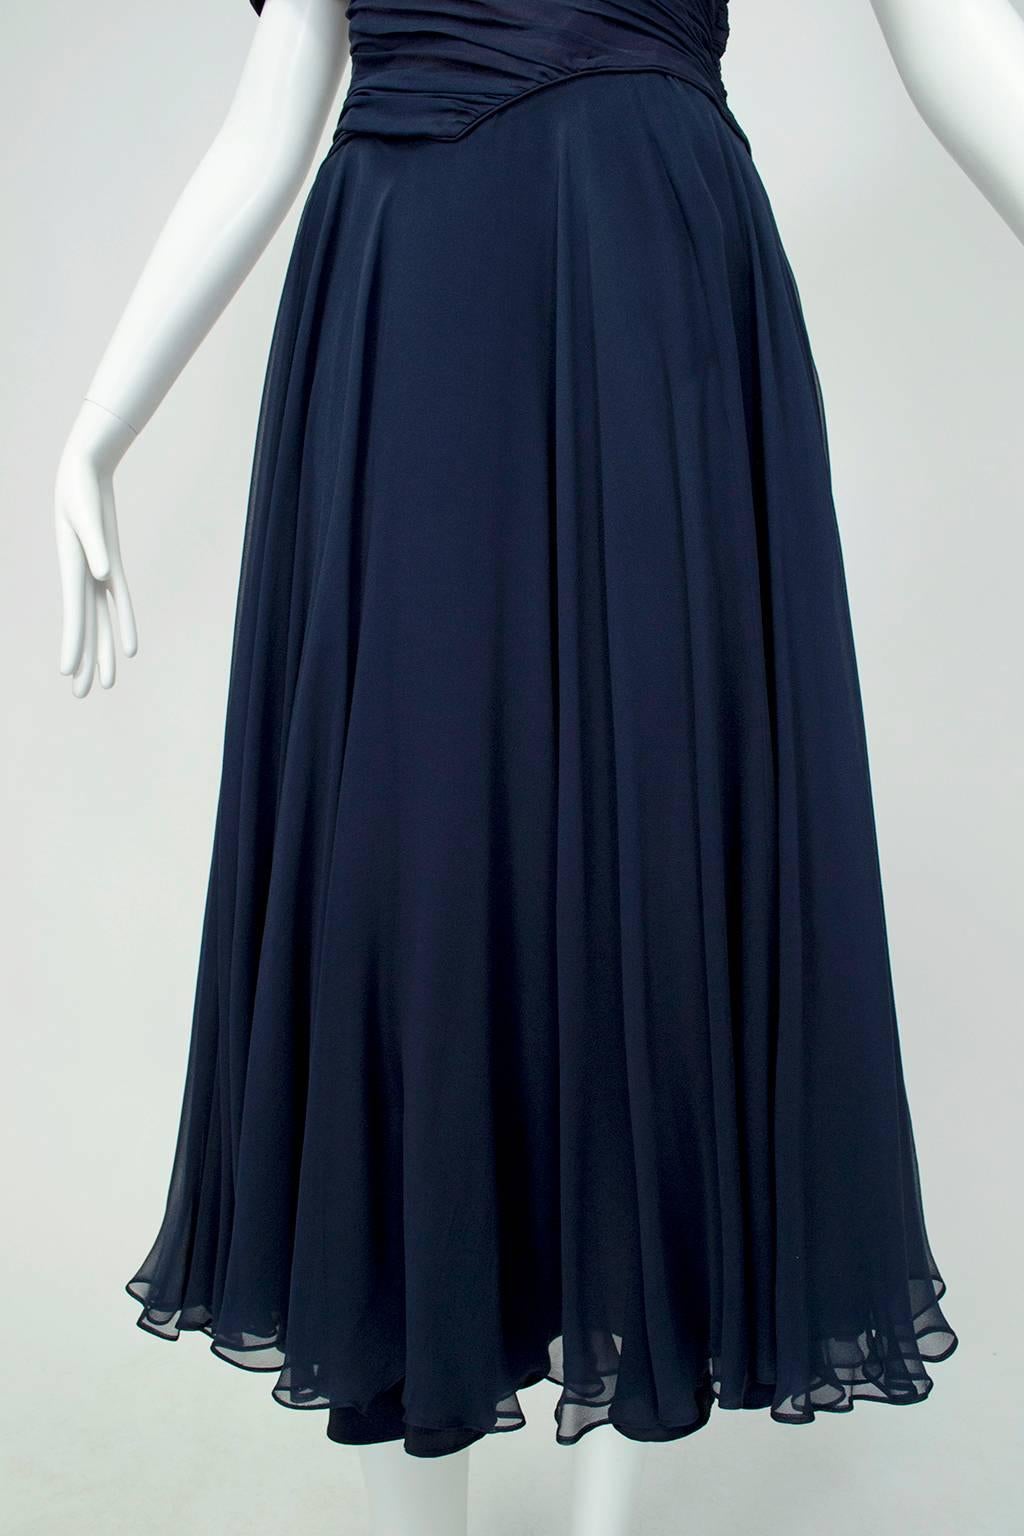 Ceil Chapman Navy Chiffon Portrait Collar Dress with Shoulder Bow - Med, 1950s For Sale 7